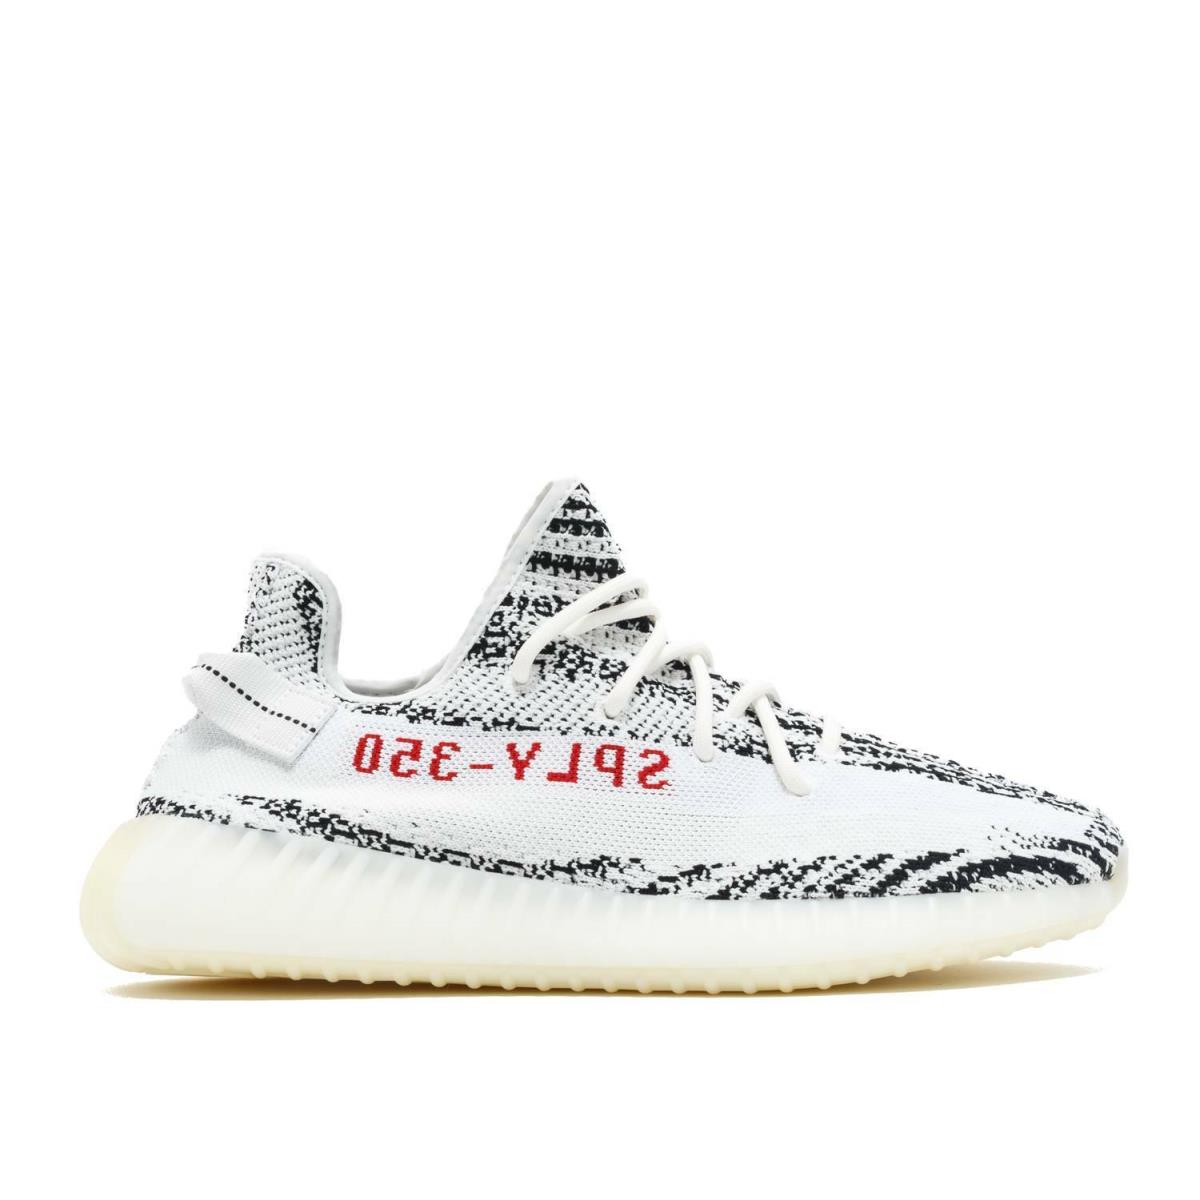 Adidas Men`s Yeezy Boost 350 V2 Zebra Athletic Fashion Sneakers CP9654